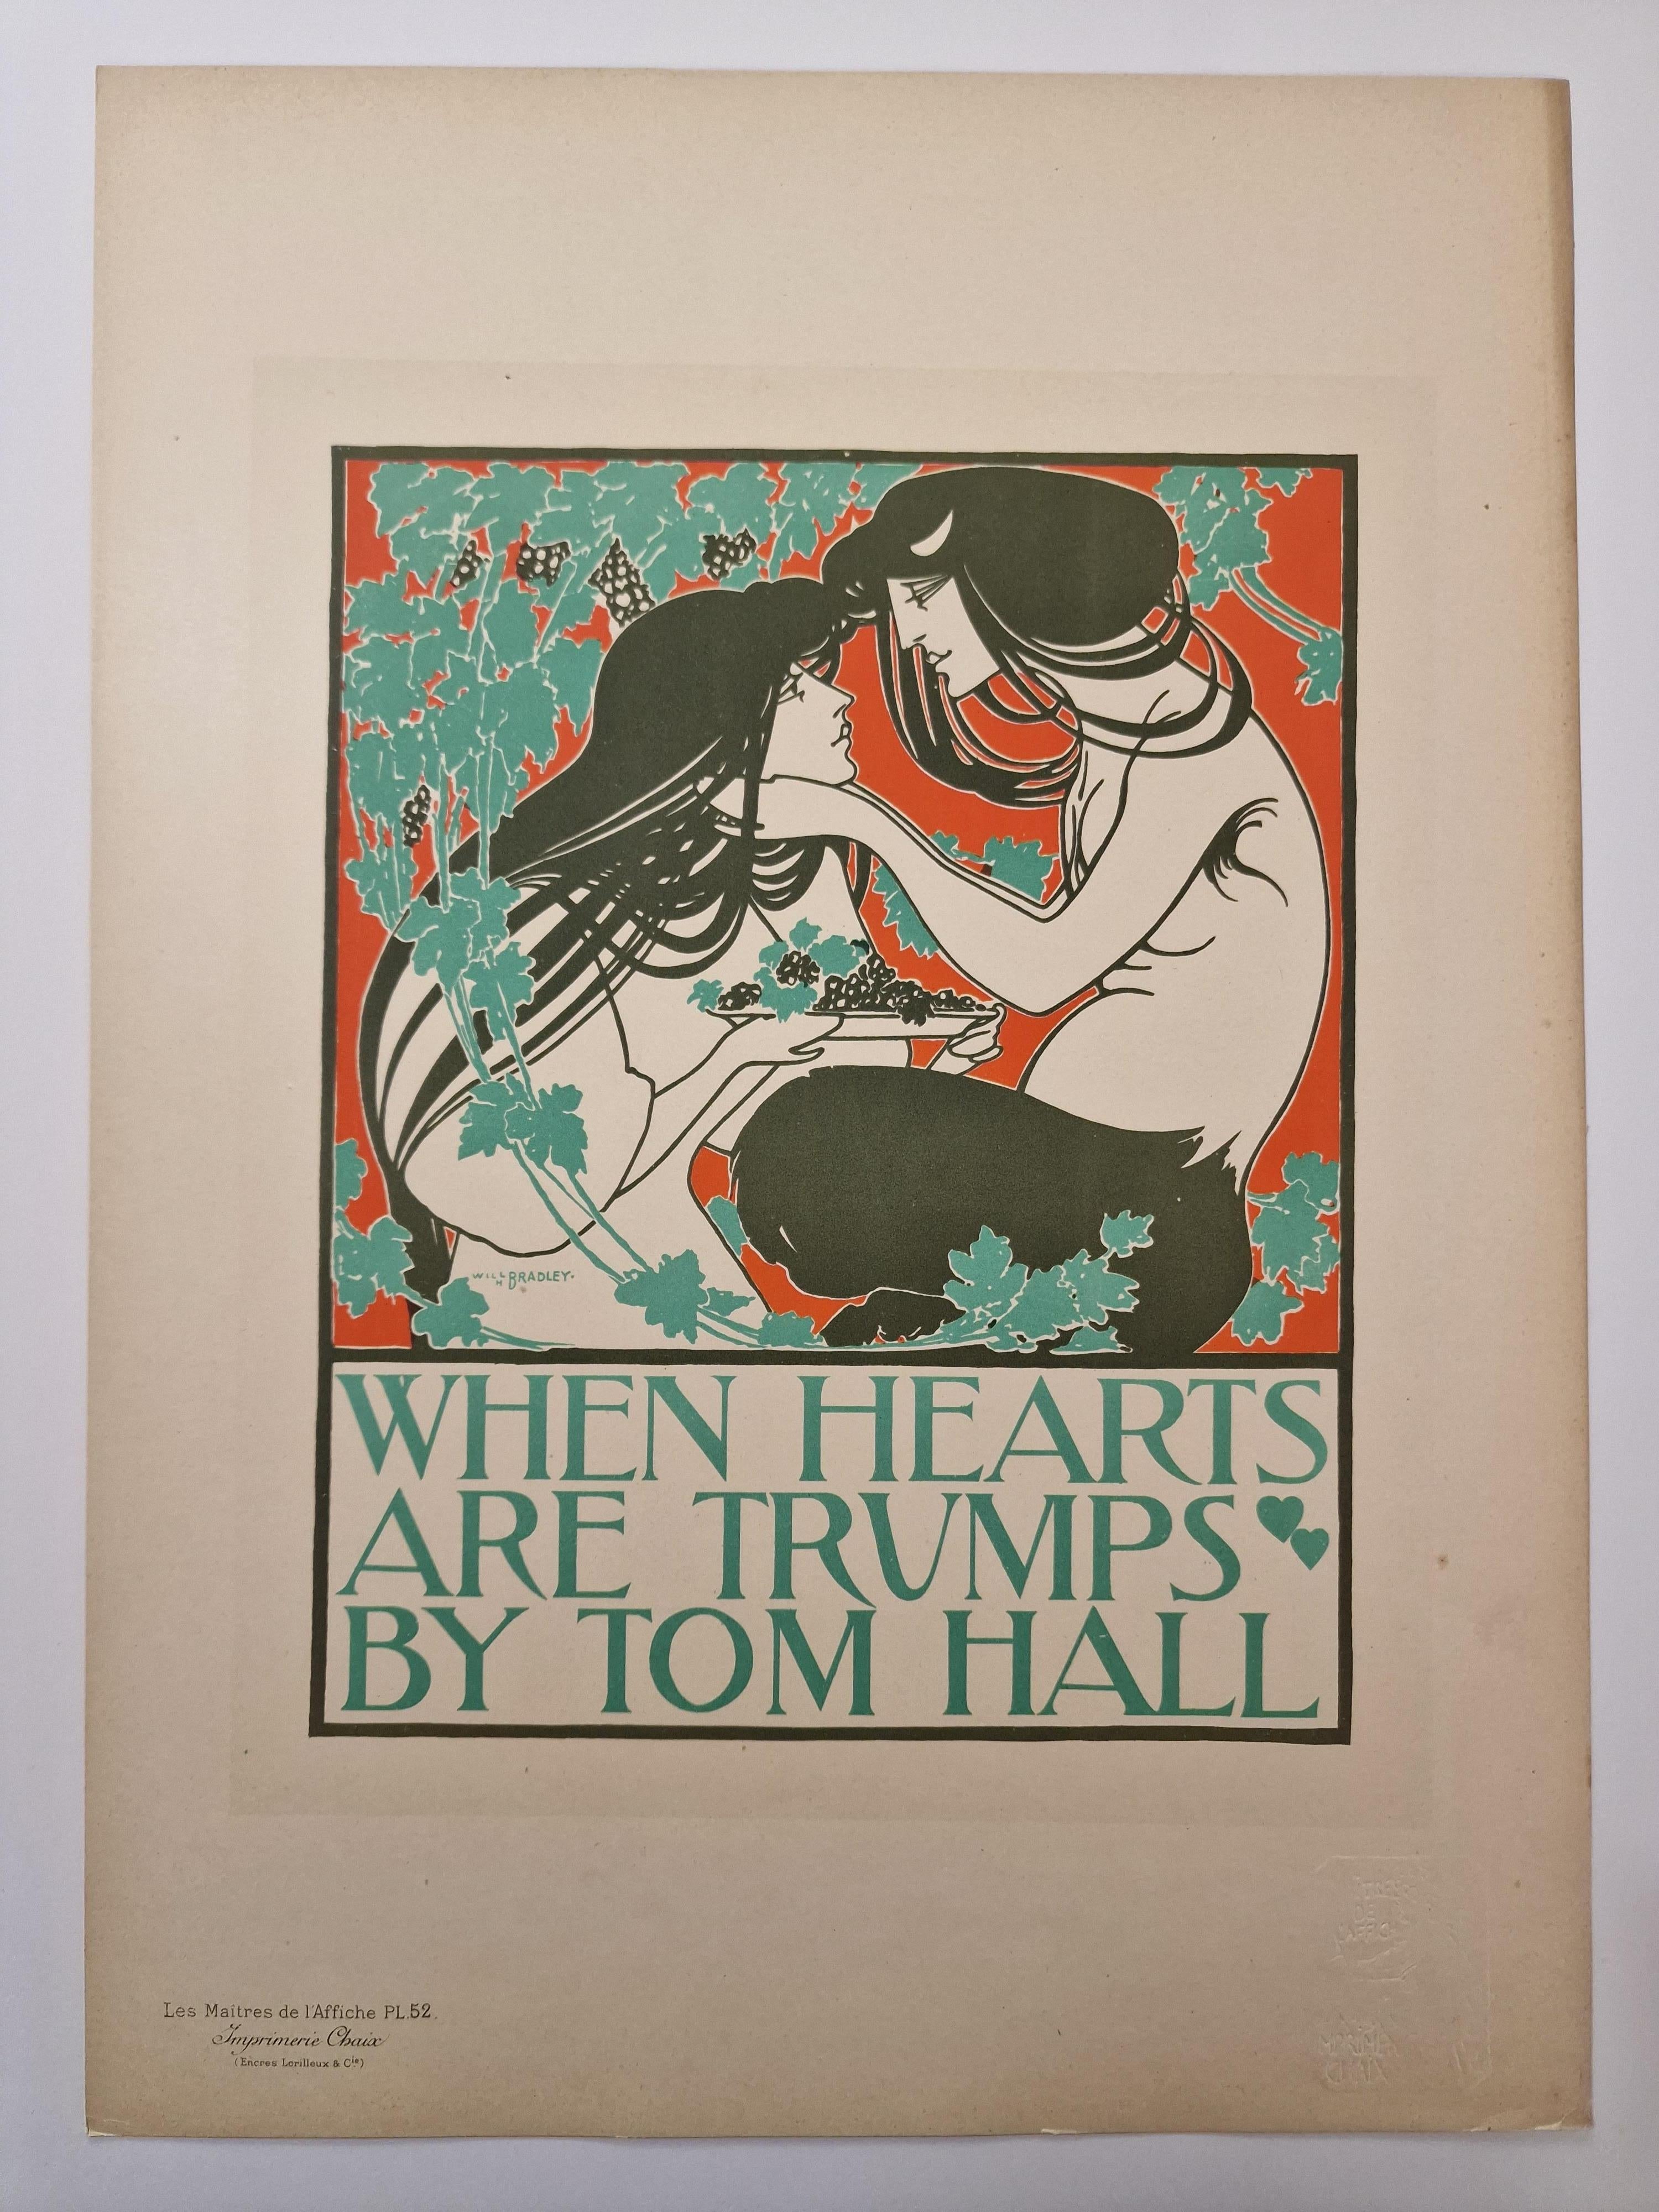 When hearts are trumps - Print by Will Bradley